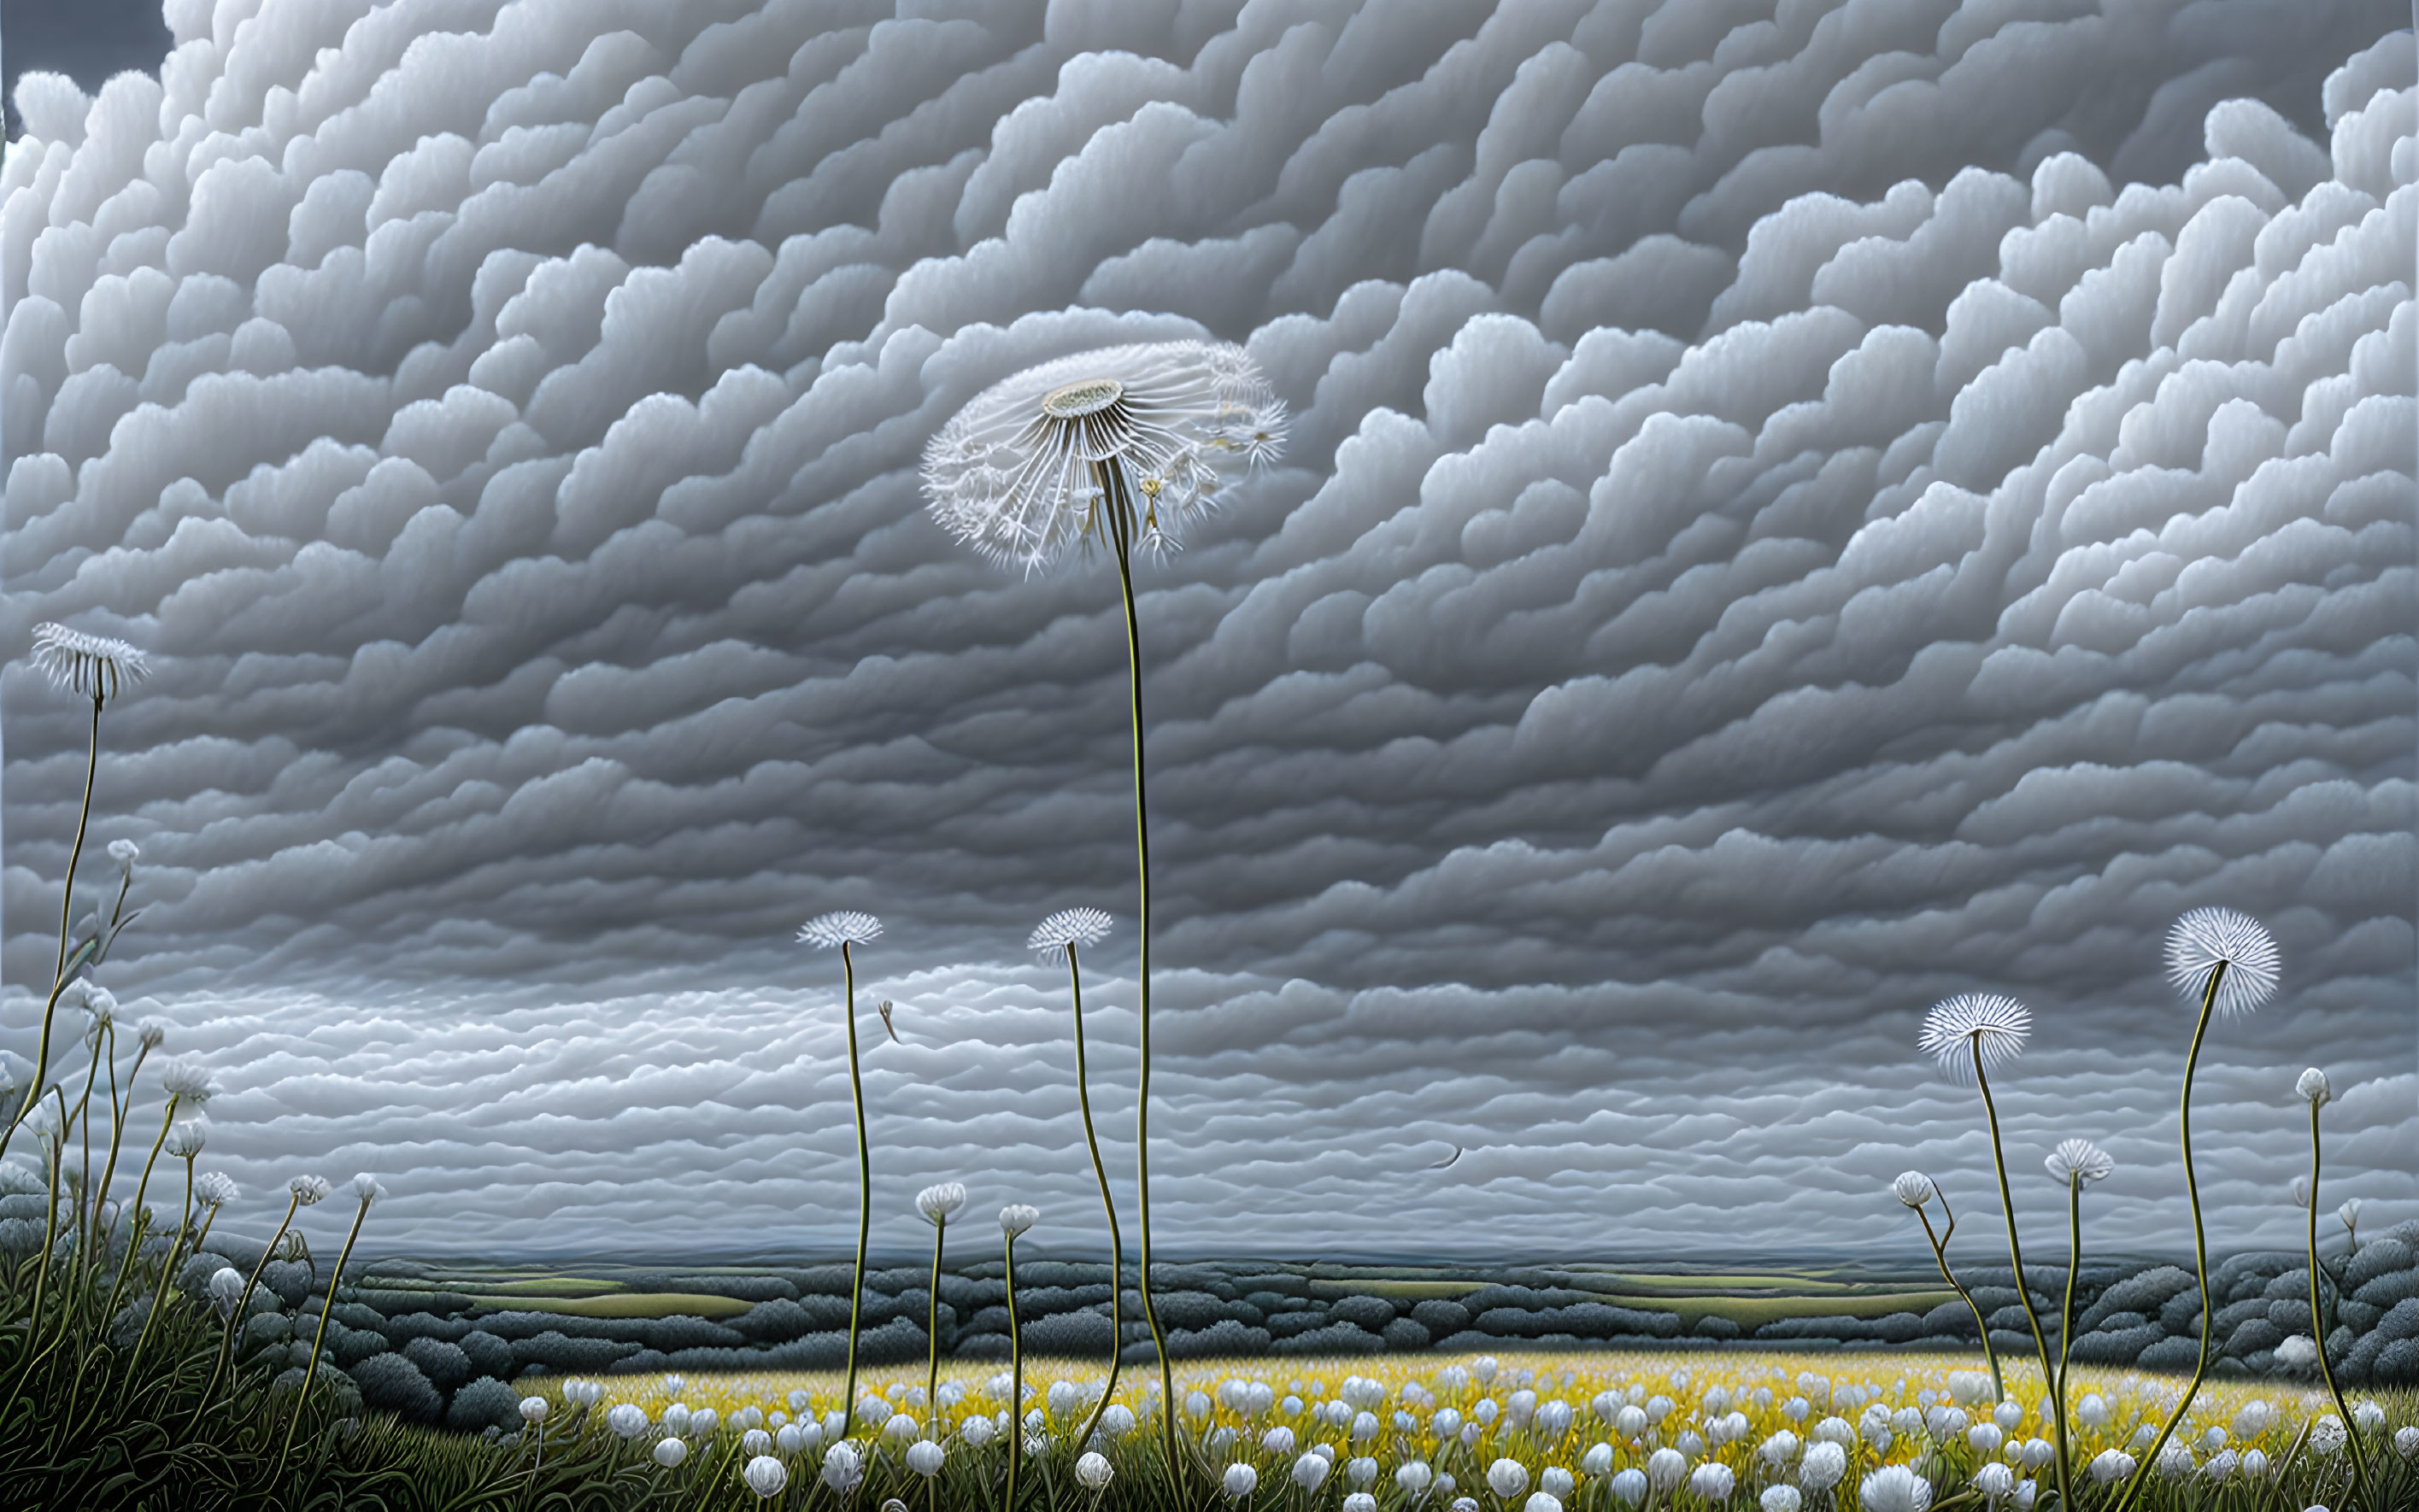 Fields and dandelion seeds